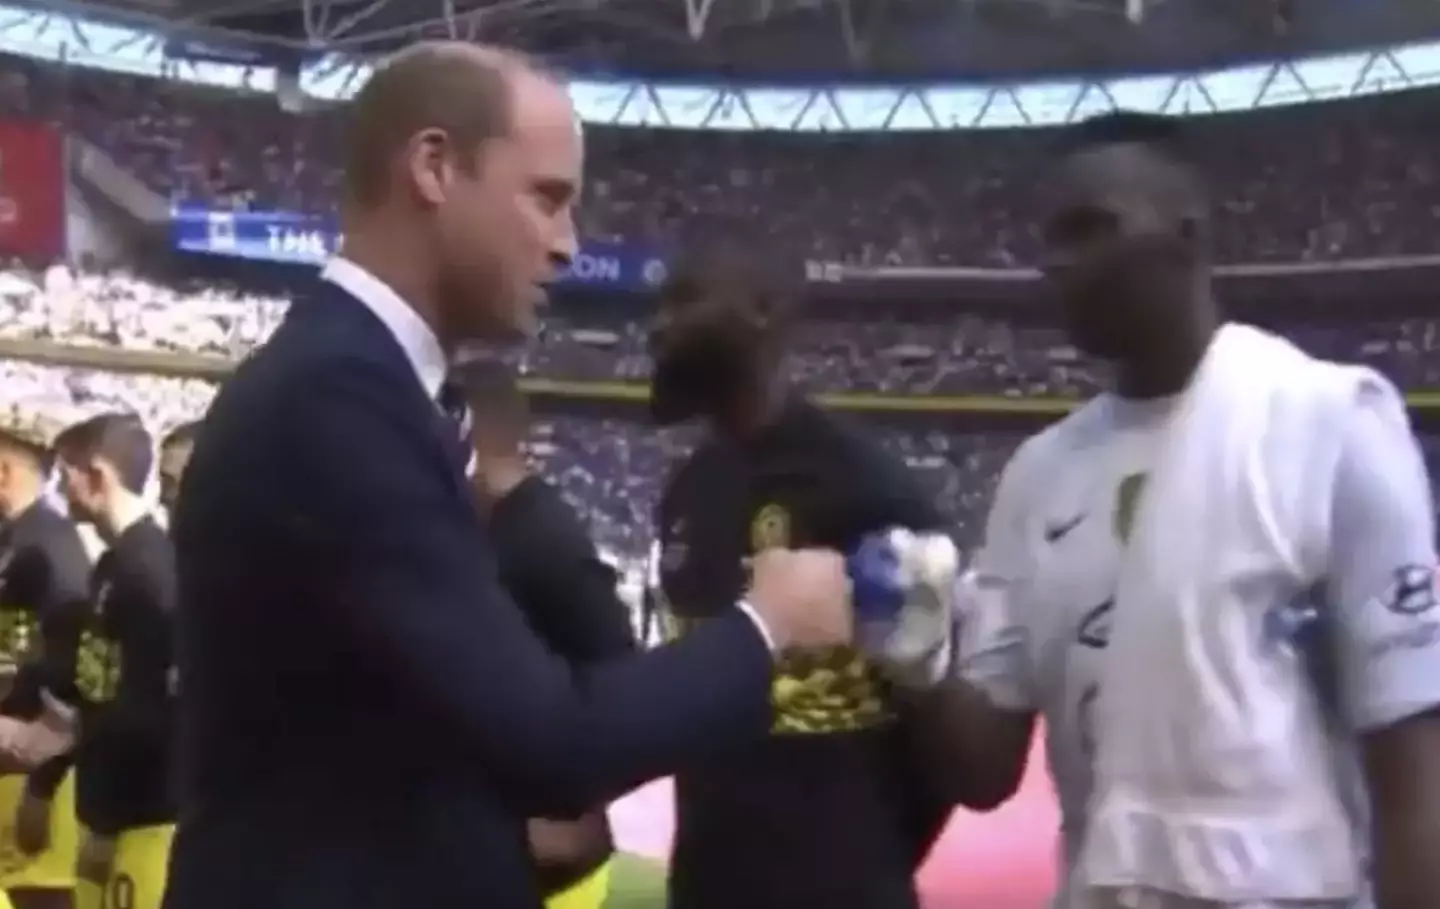 Prince William appeared to be booed at last year's FA Cup.